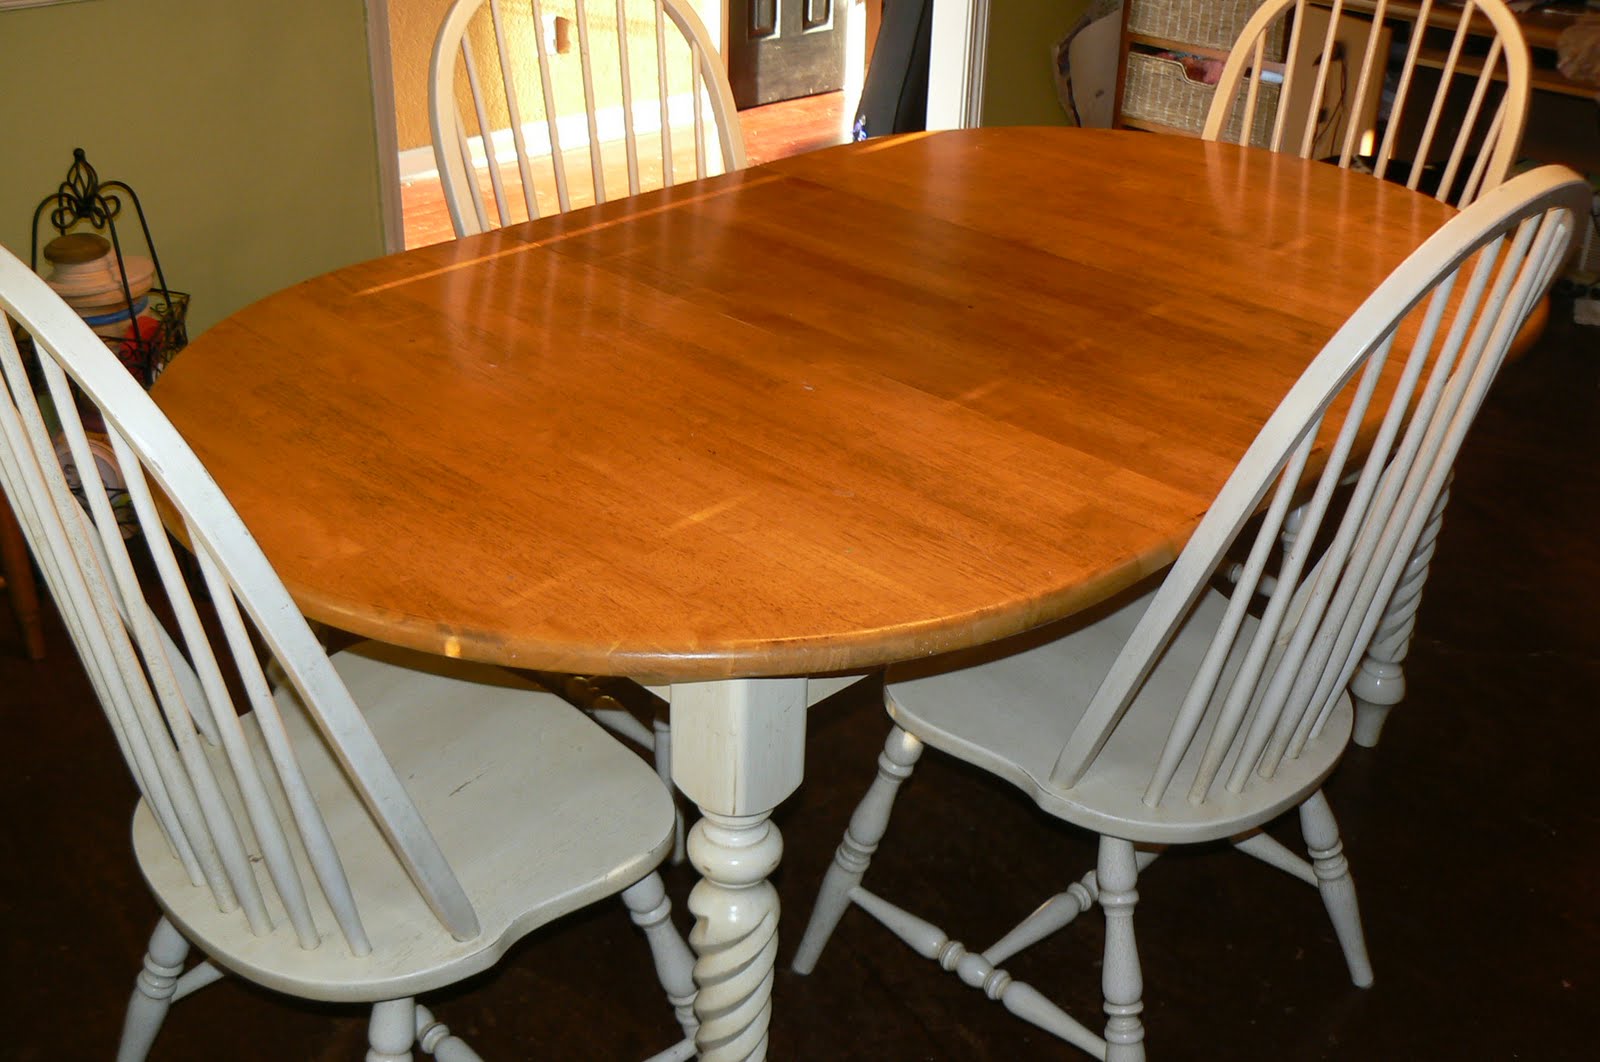 Dining Room Table For Sale Craigslist